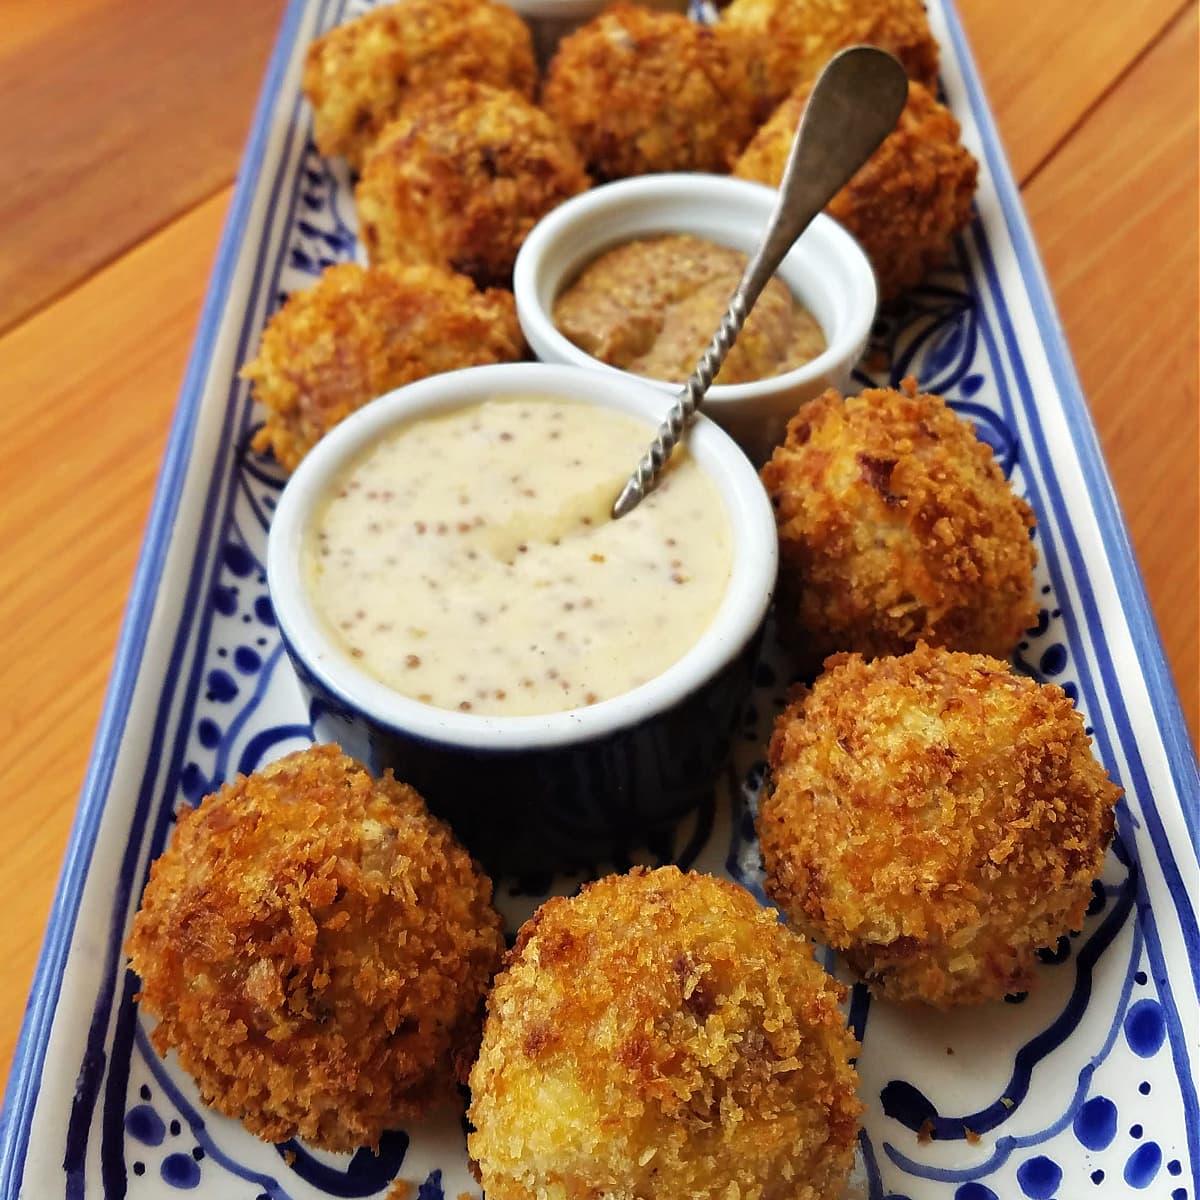 Sauerkraut fritters on a blue and white tray, served with dipping sauces.